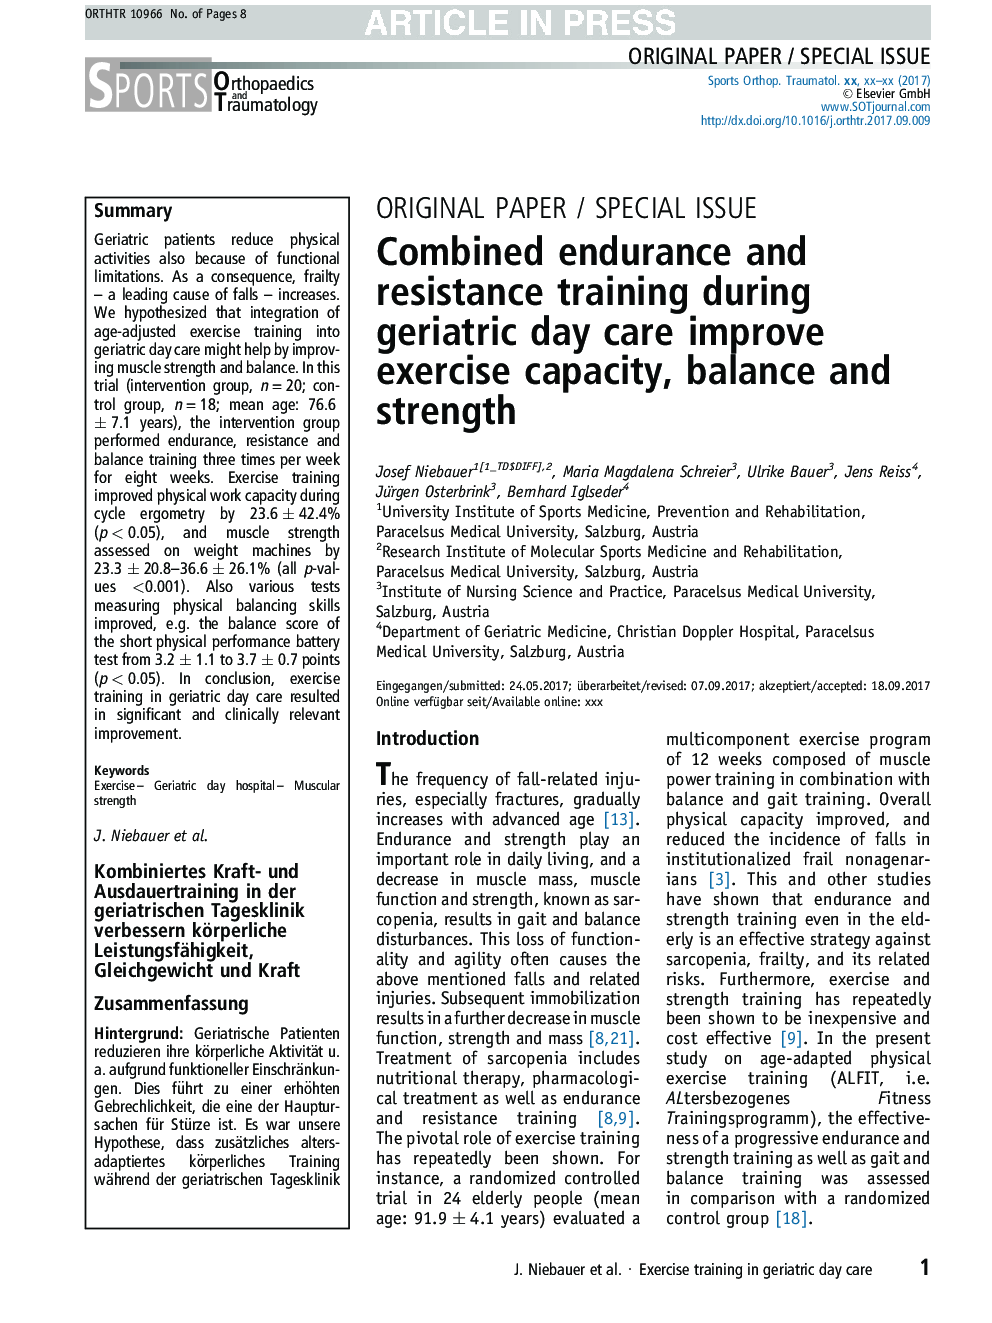 Combined endurance and resistance training during geriatric day care improve exercise capacity, balance and strength